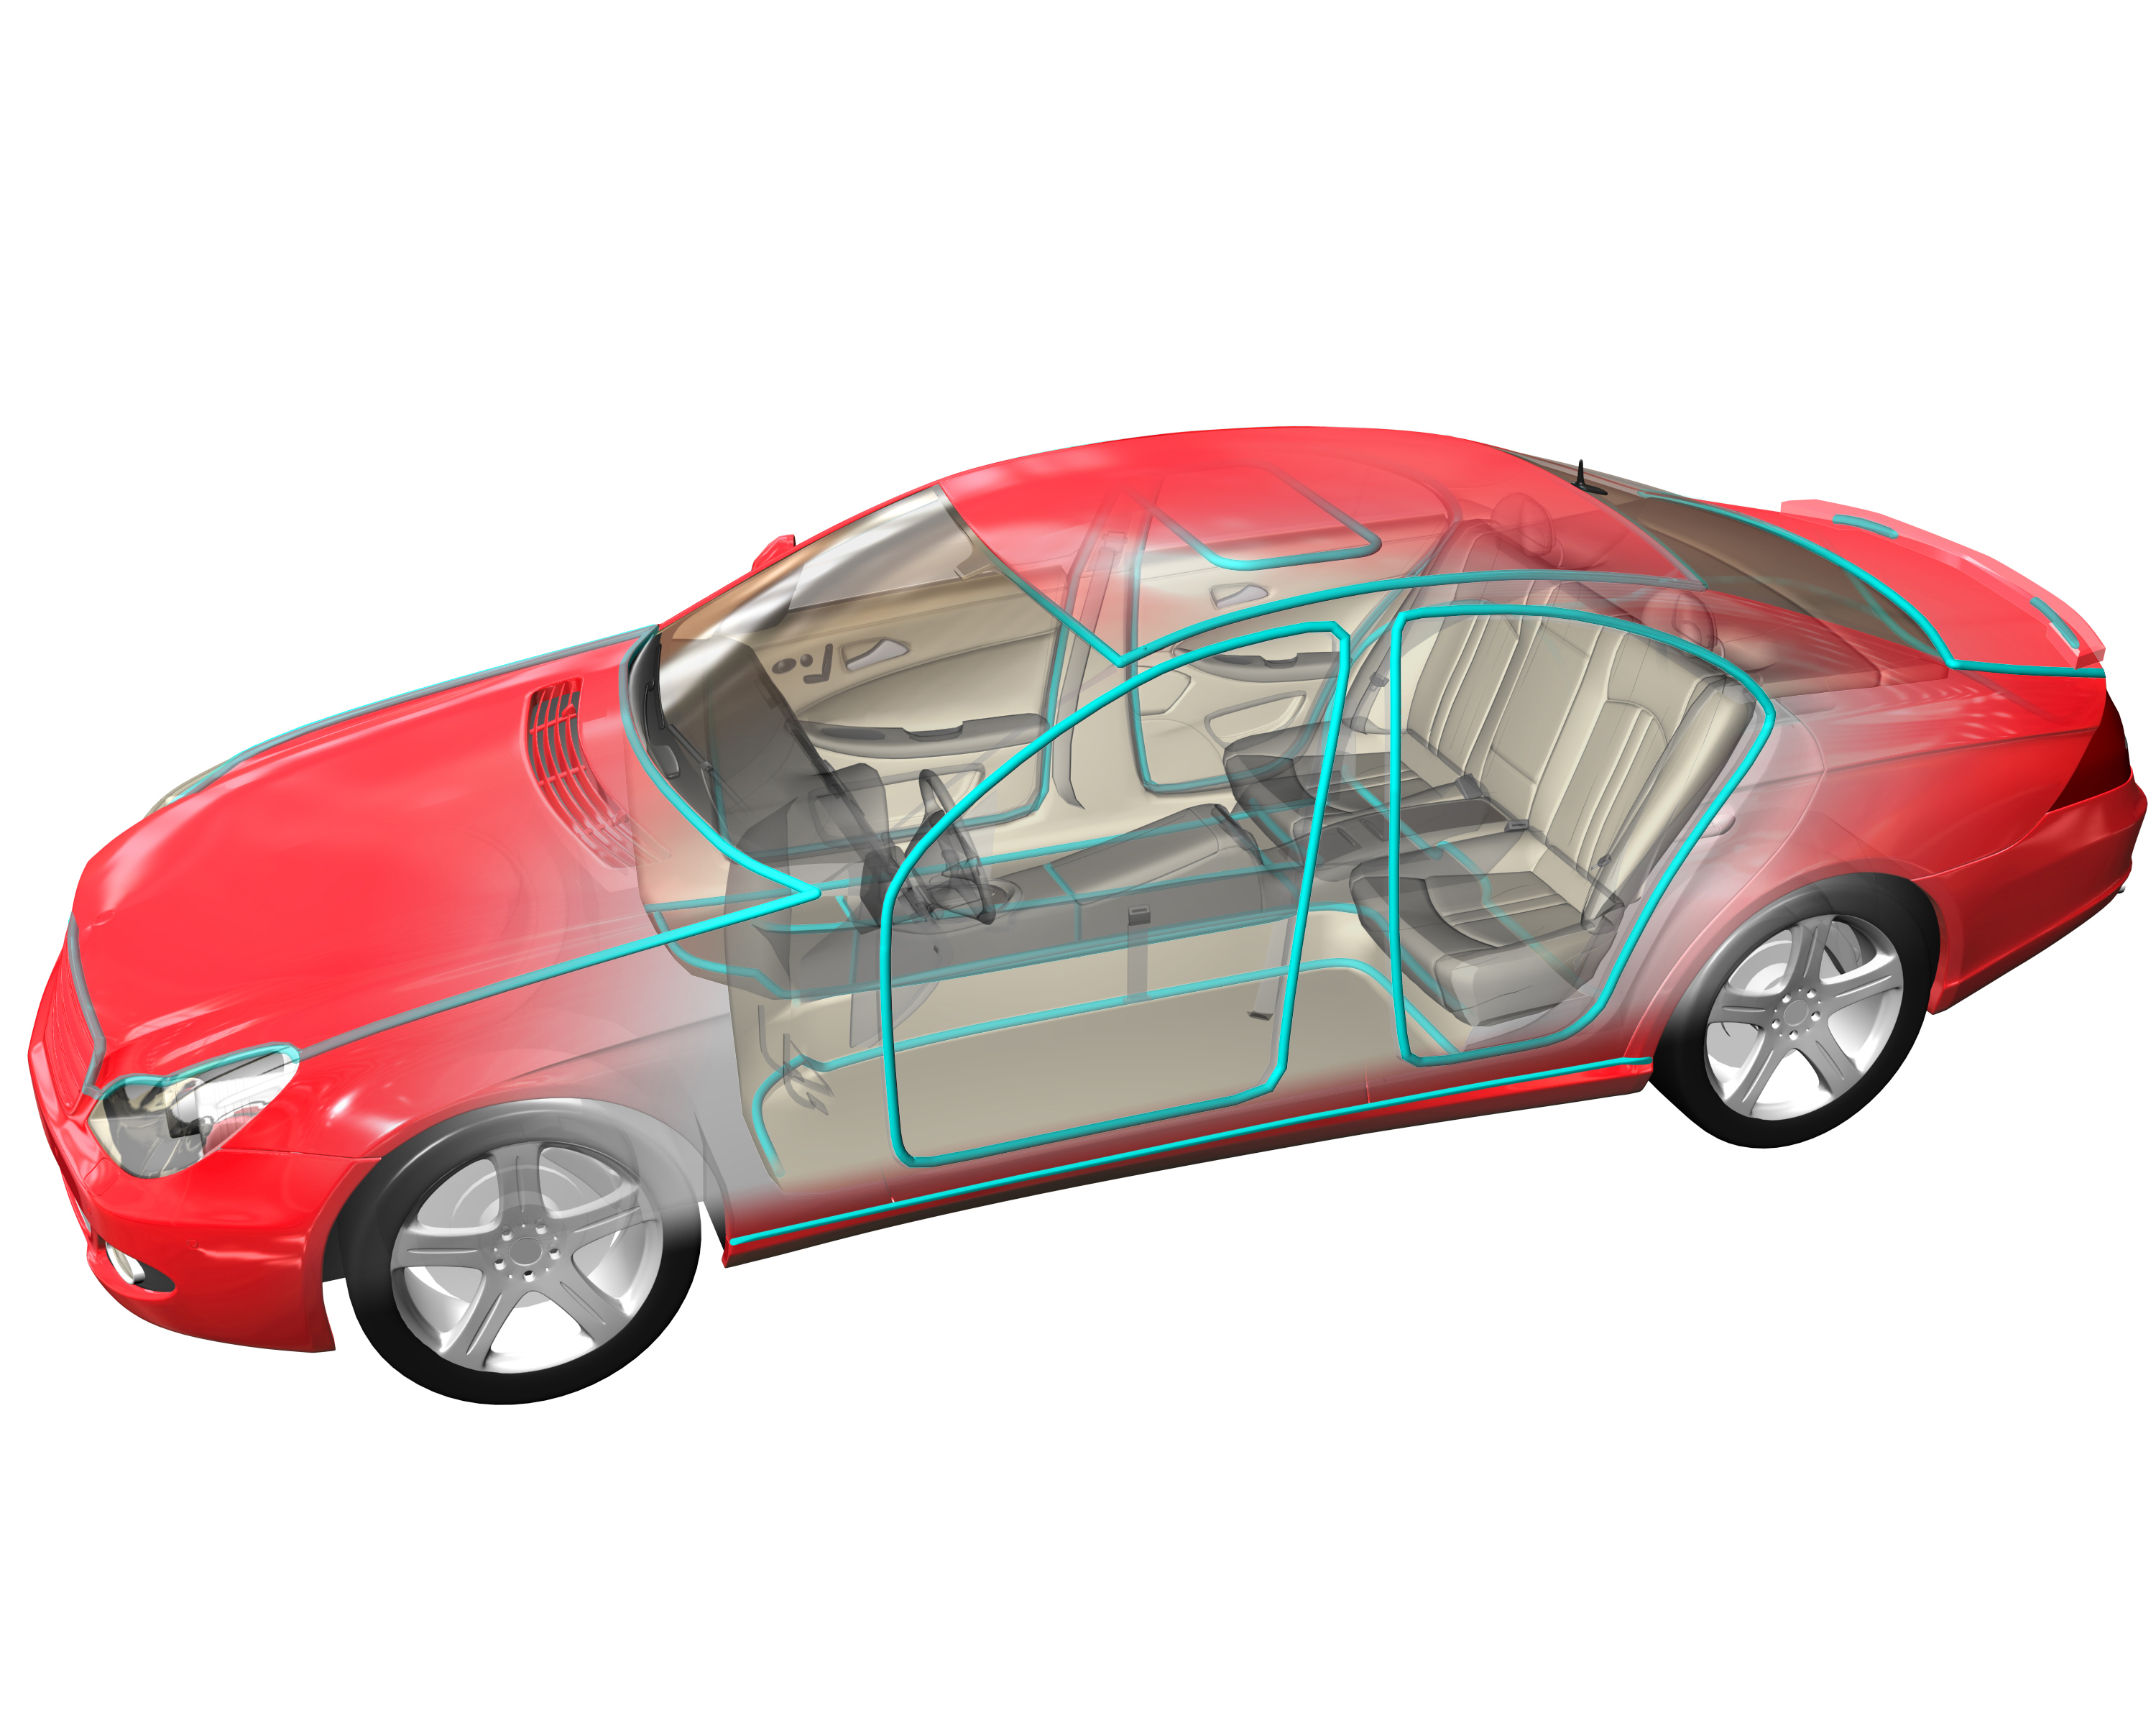 The green line shows the typical application areas of Betaforce adhesives in passenger cars.